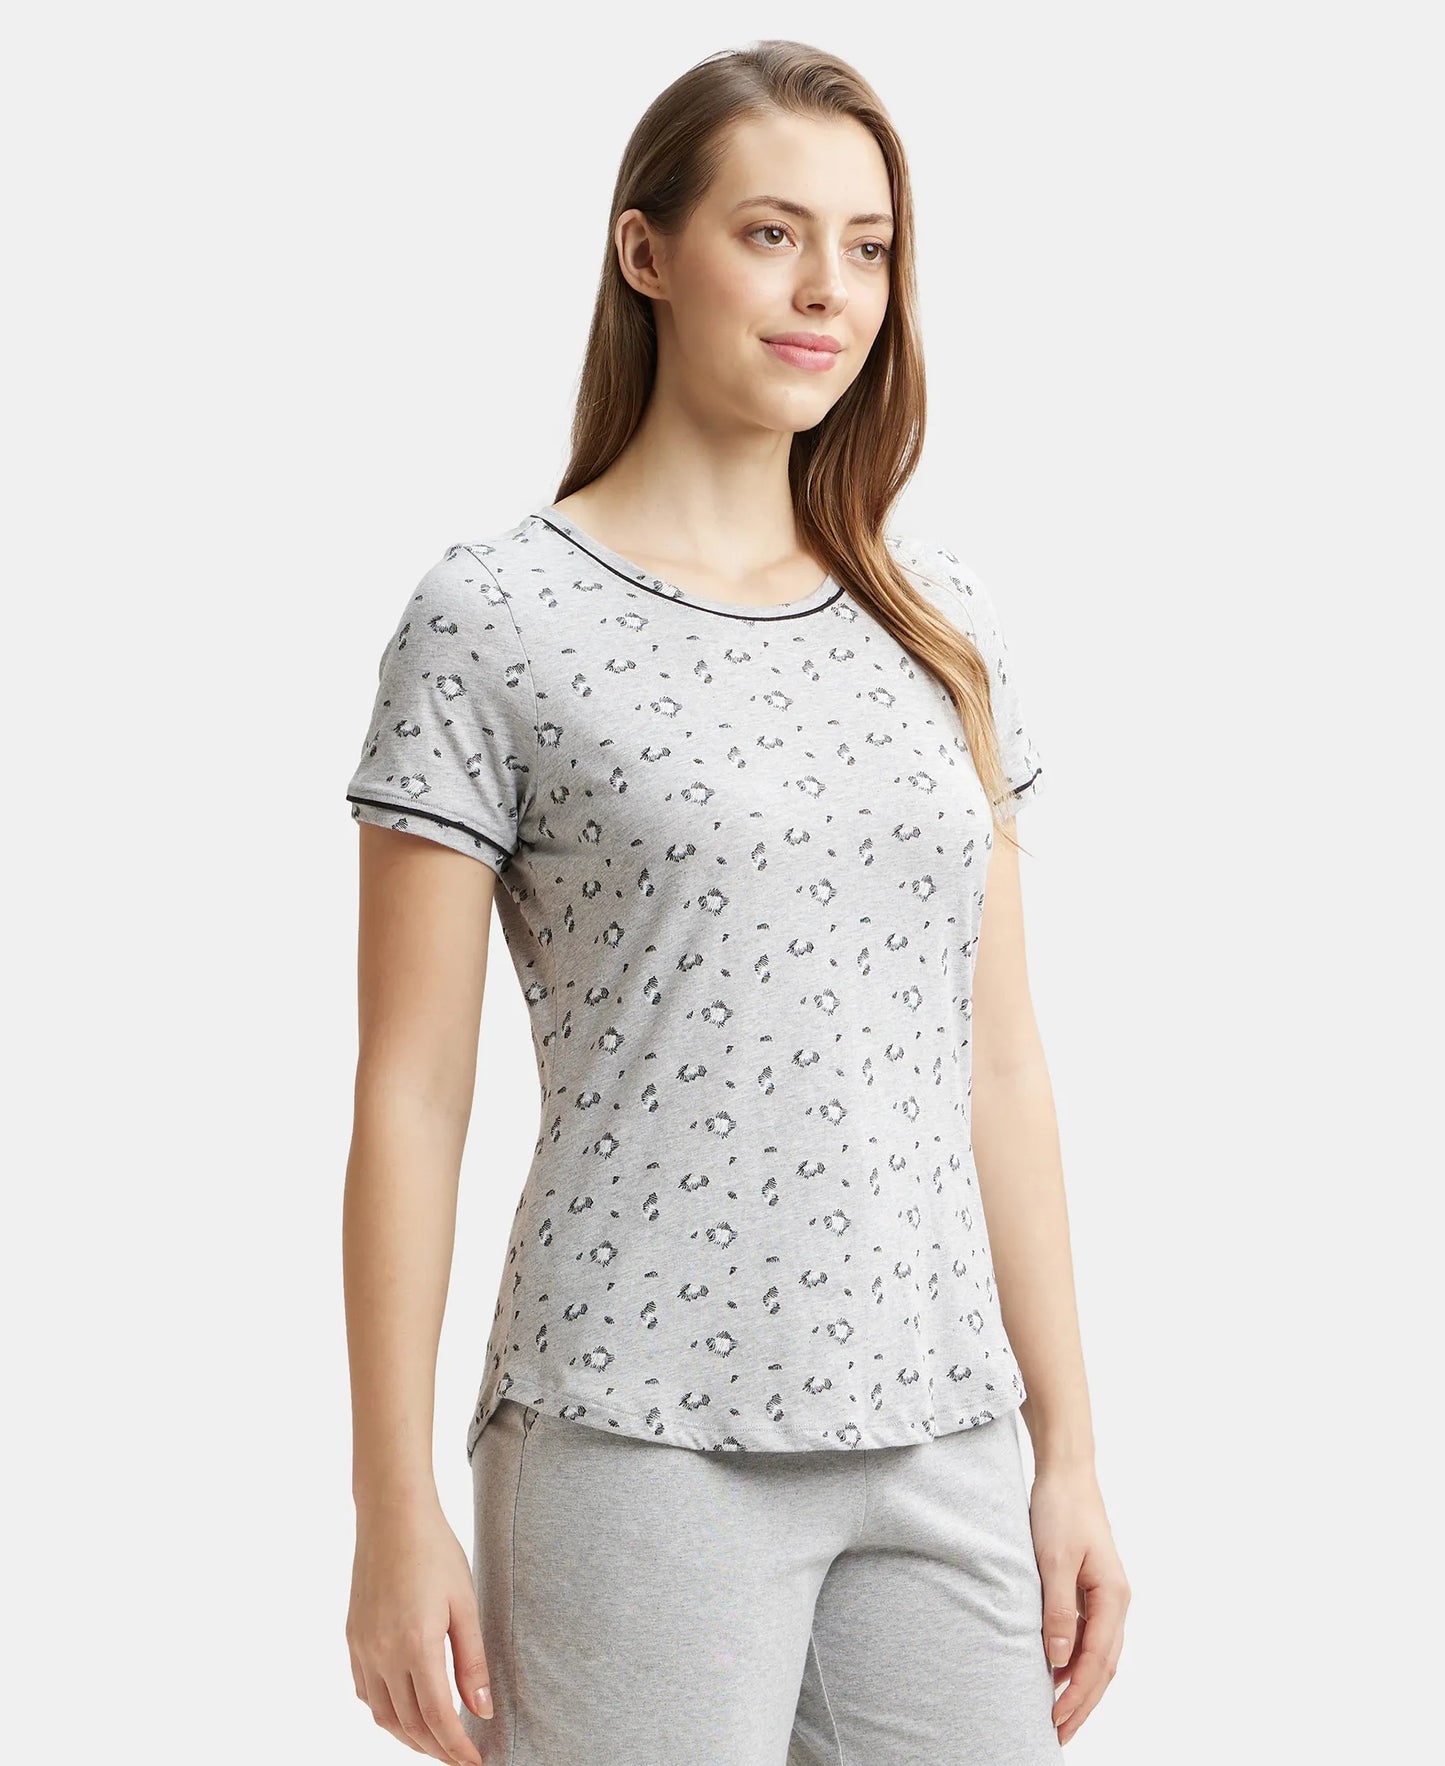 Super Combed Cotton Relaxed Fit Printed Round Neck Half Sleeve T-Shirt with Contrast Piping Design - Light Grey Melange-2